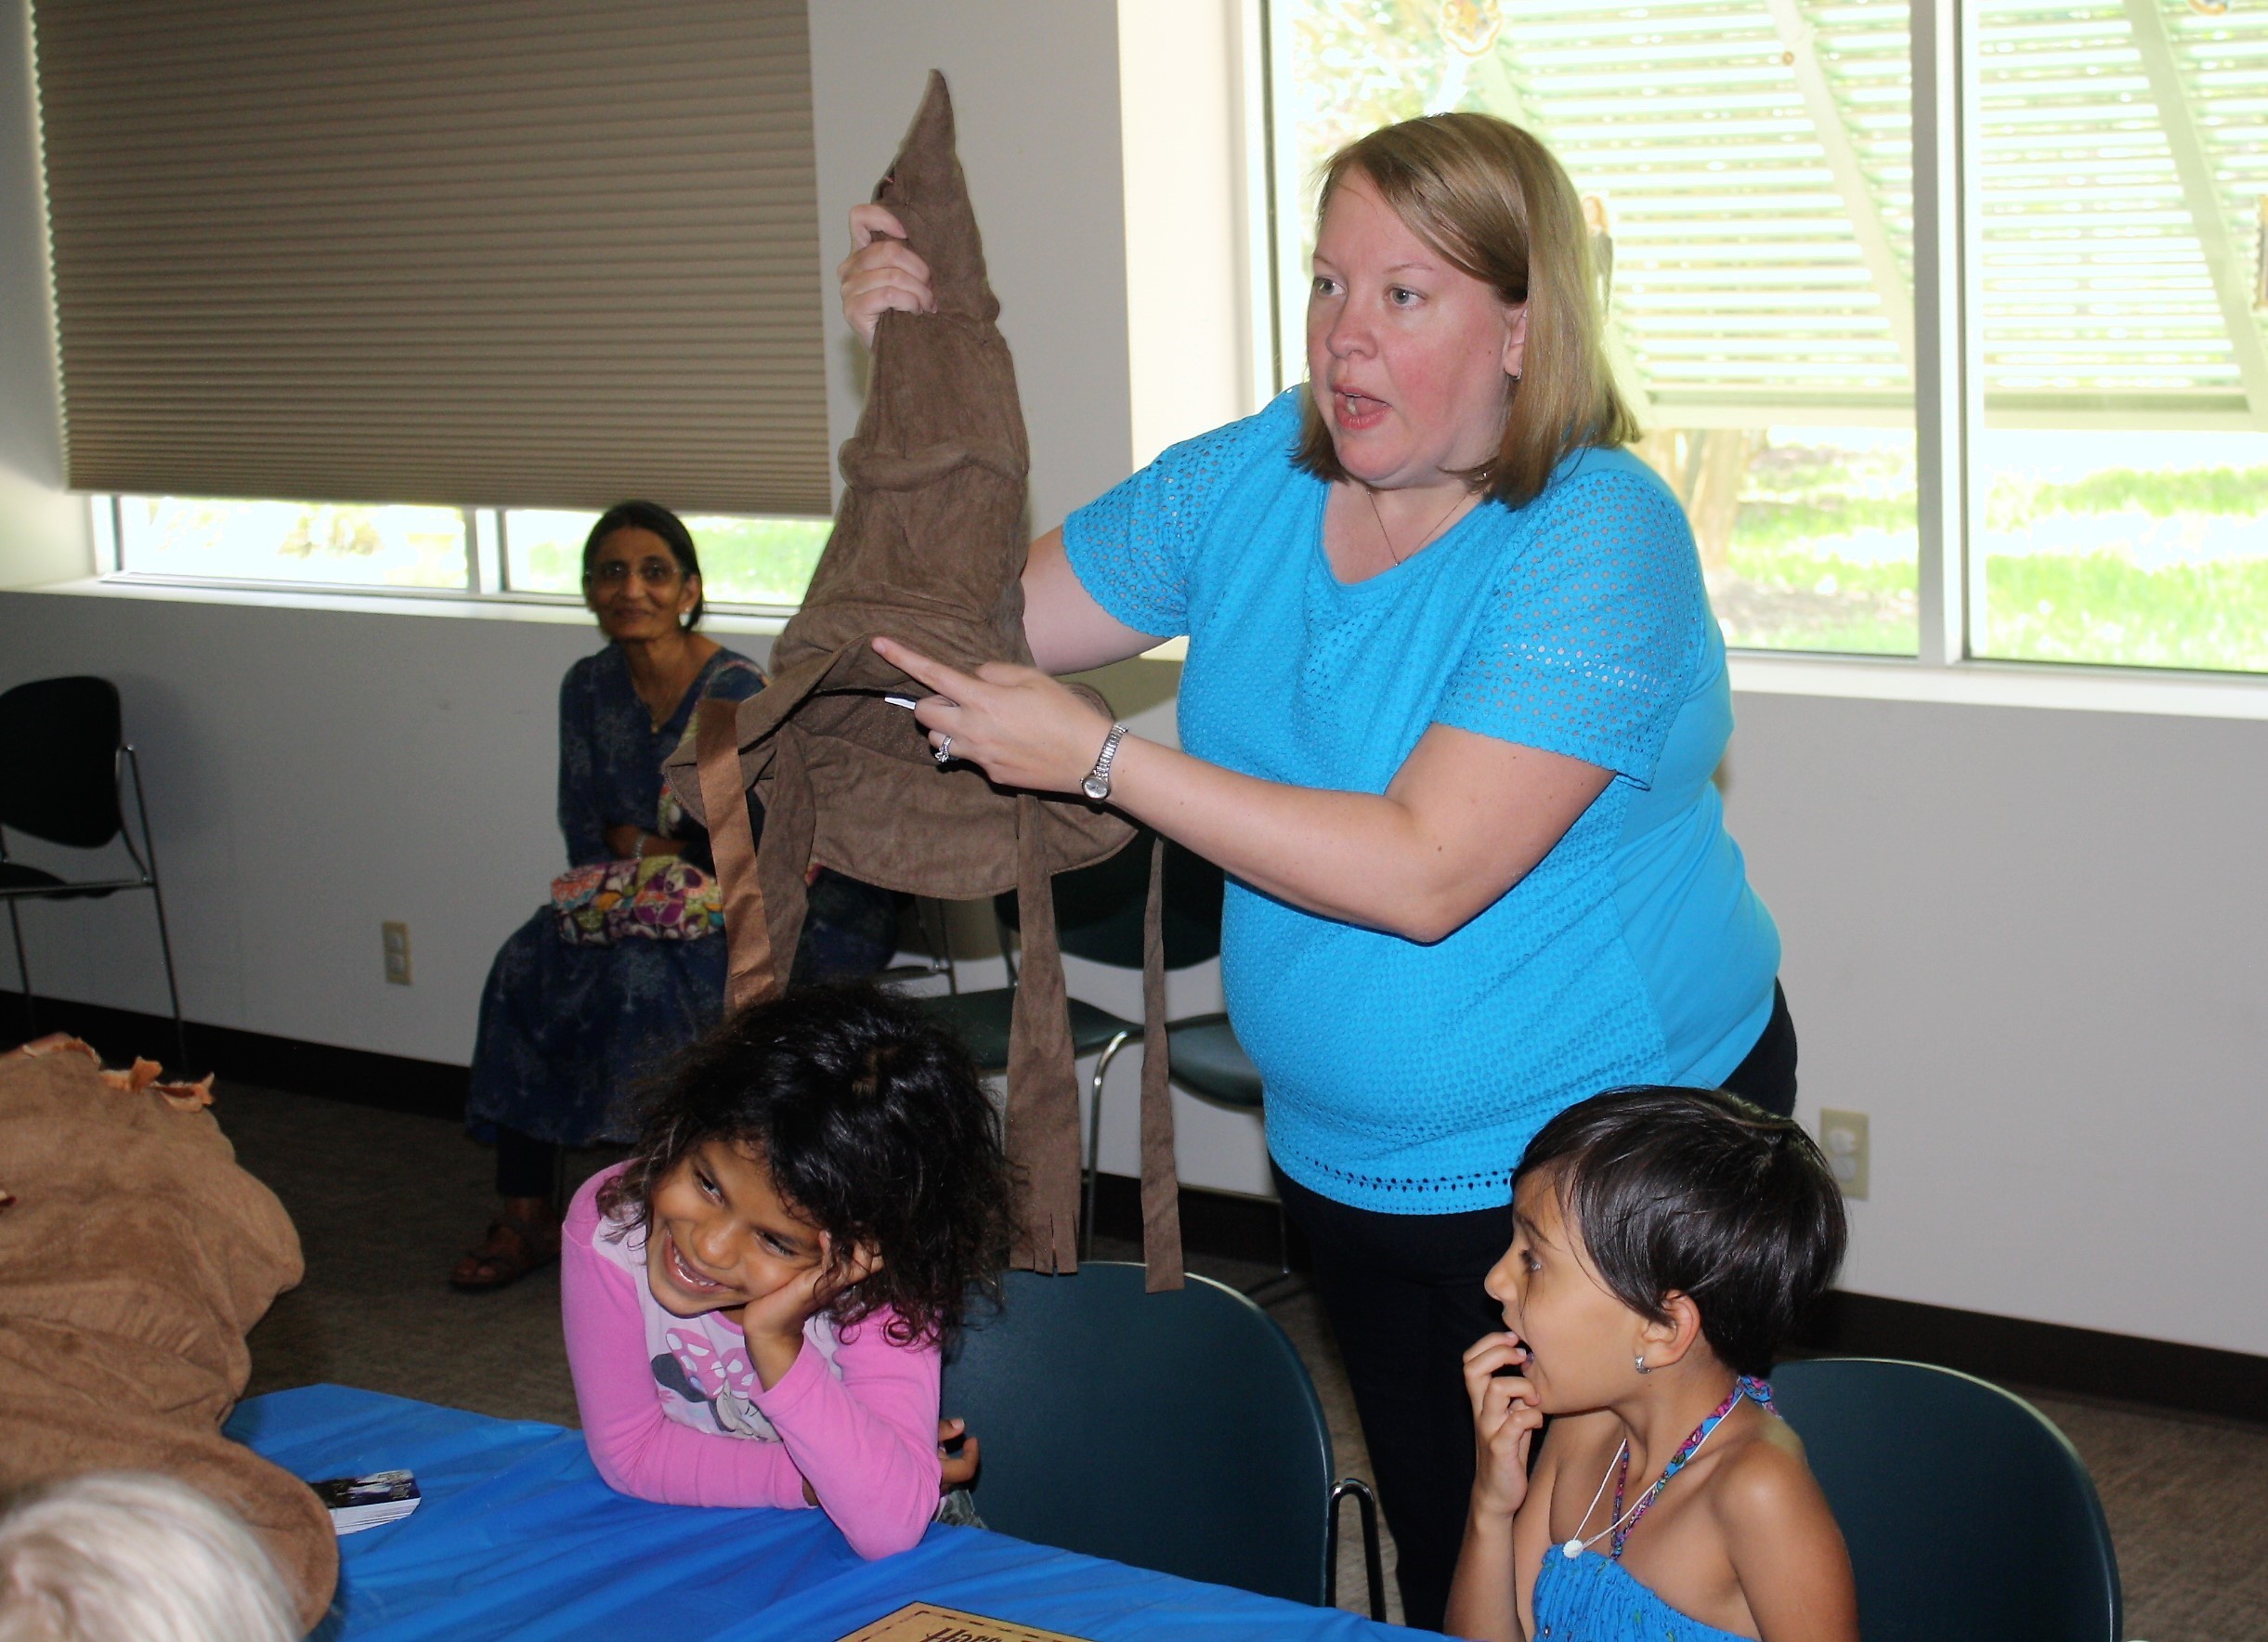 Youth Services Librarian Anne Crawford places the sorting hat on a child's head.